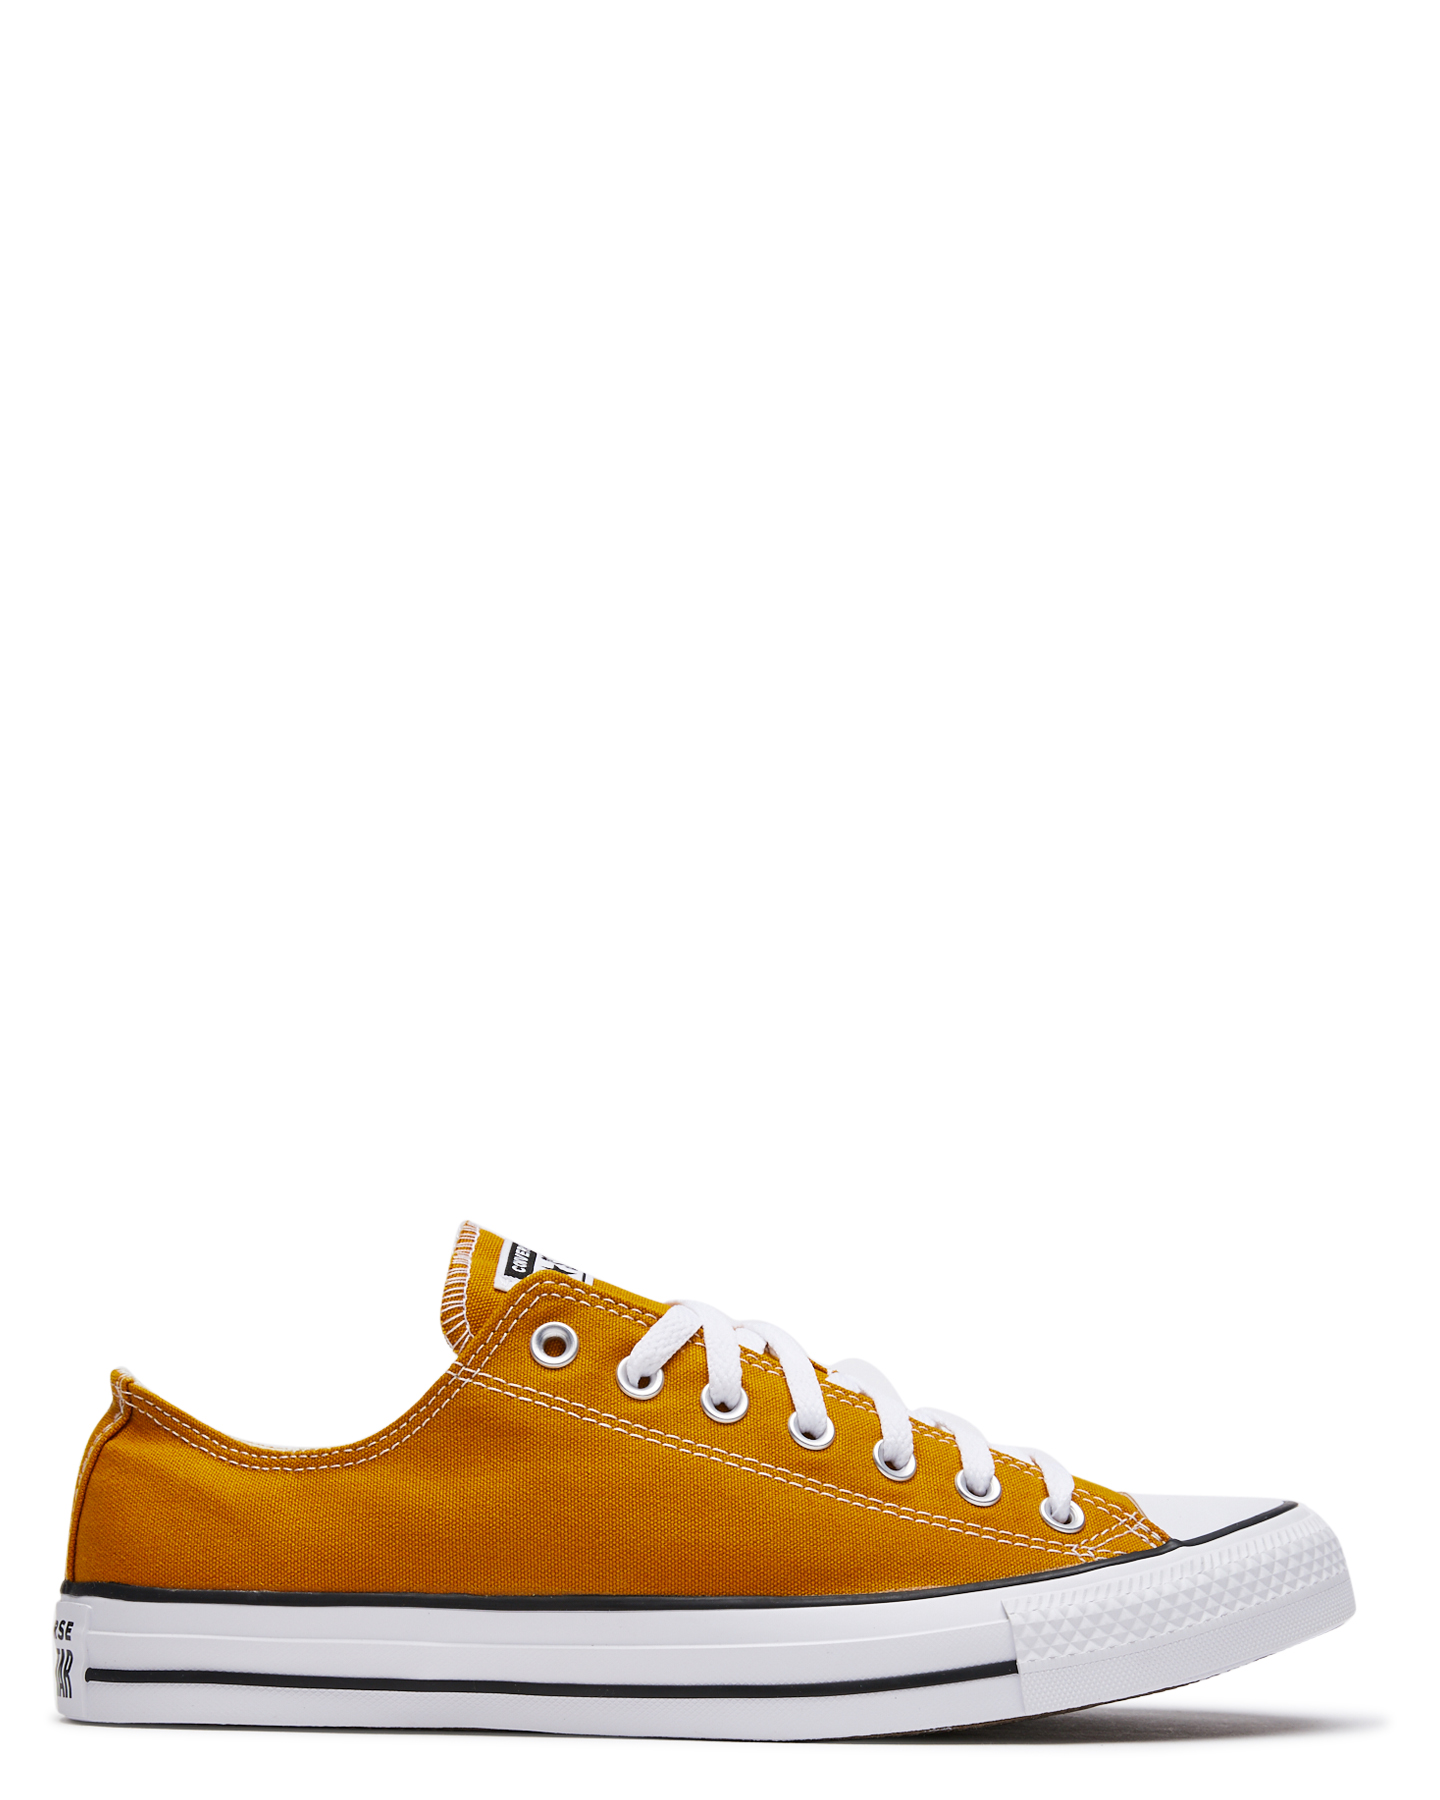 converse low tops yellow